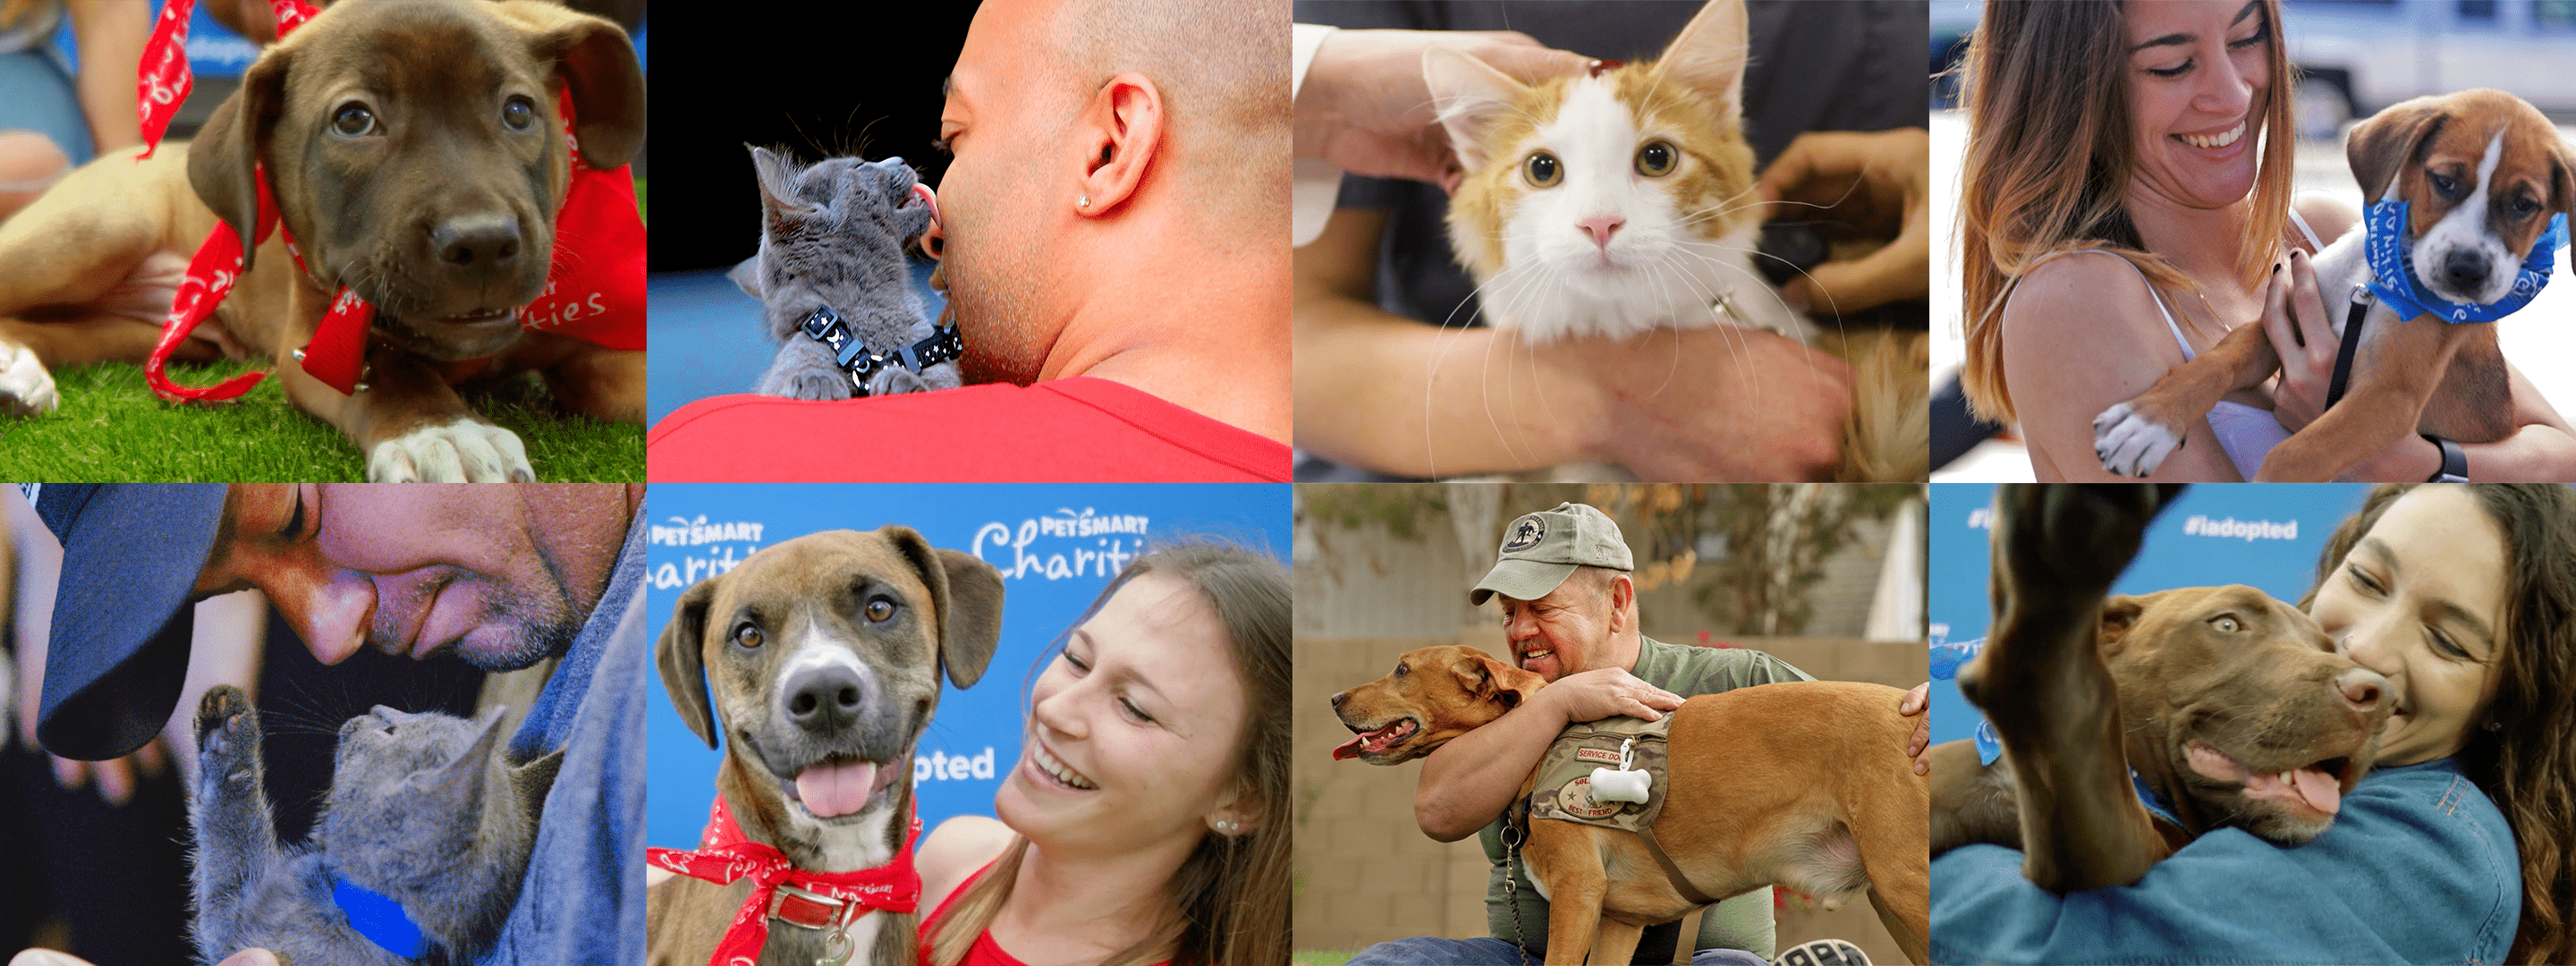 a tiled image of people interacting with pets at petsmart charities adoption events